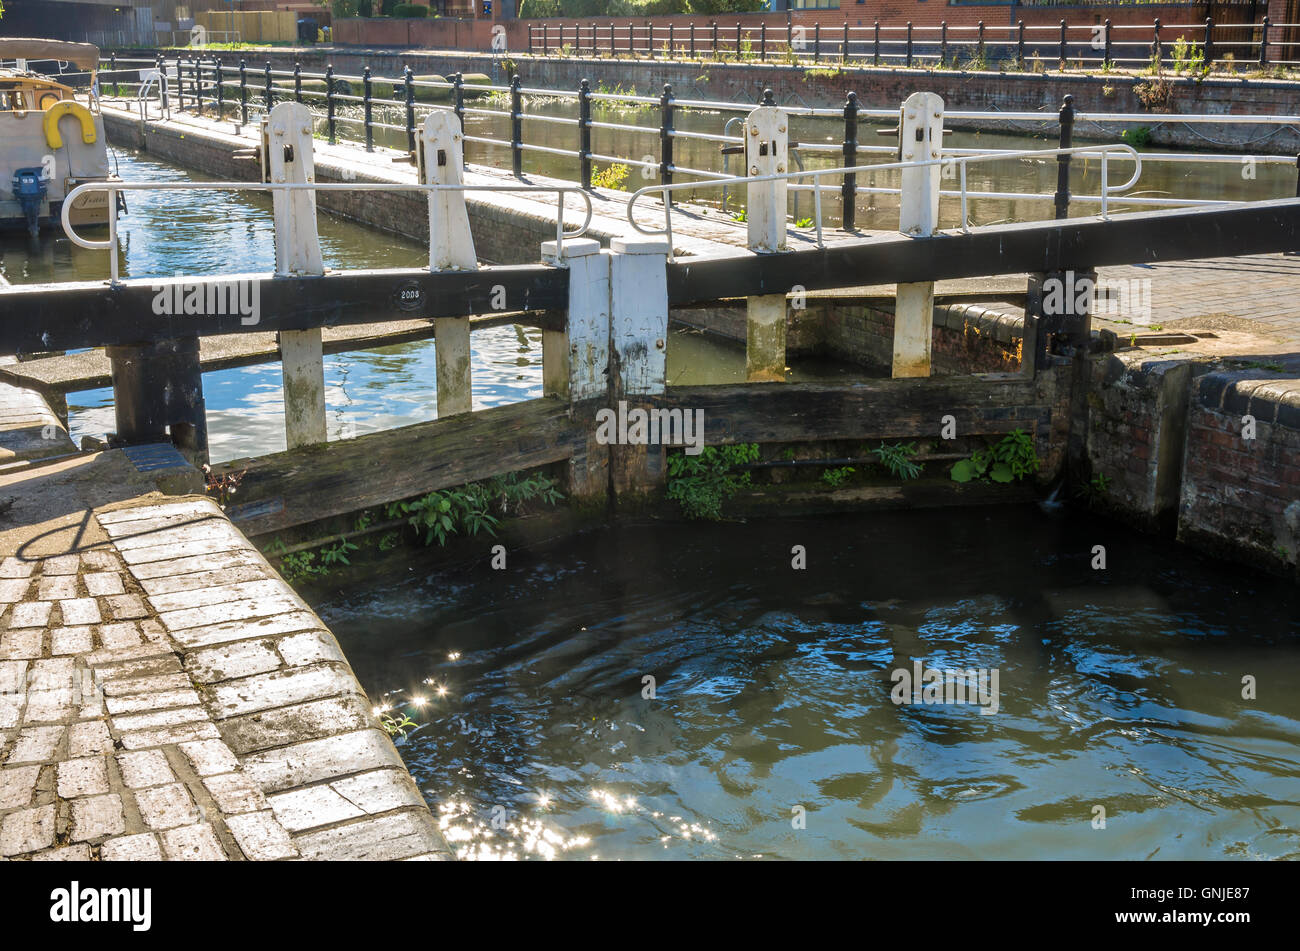 A view of a lock on the Kennet and Avon Canal in Reading, Berkshire. Stock Photo